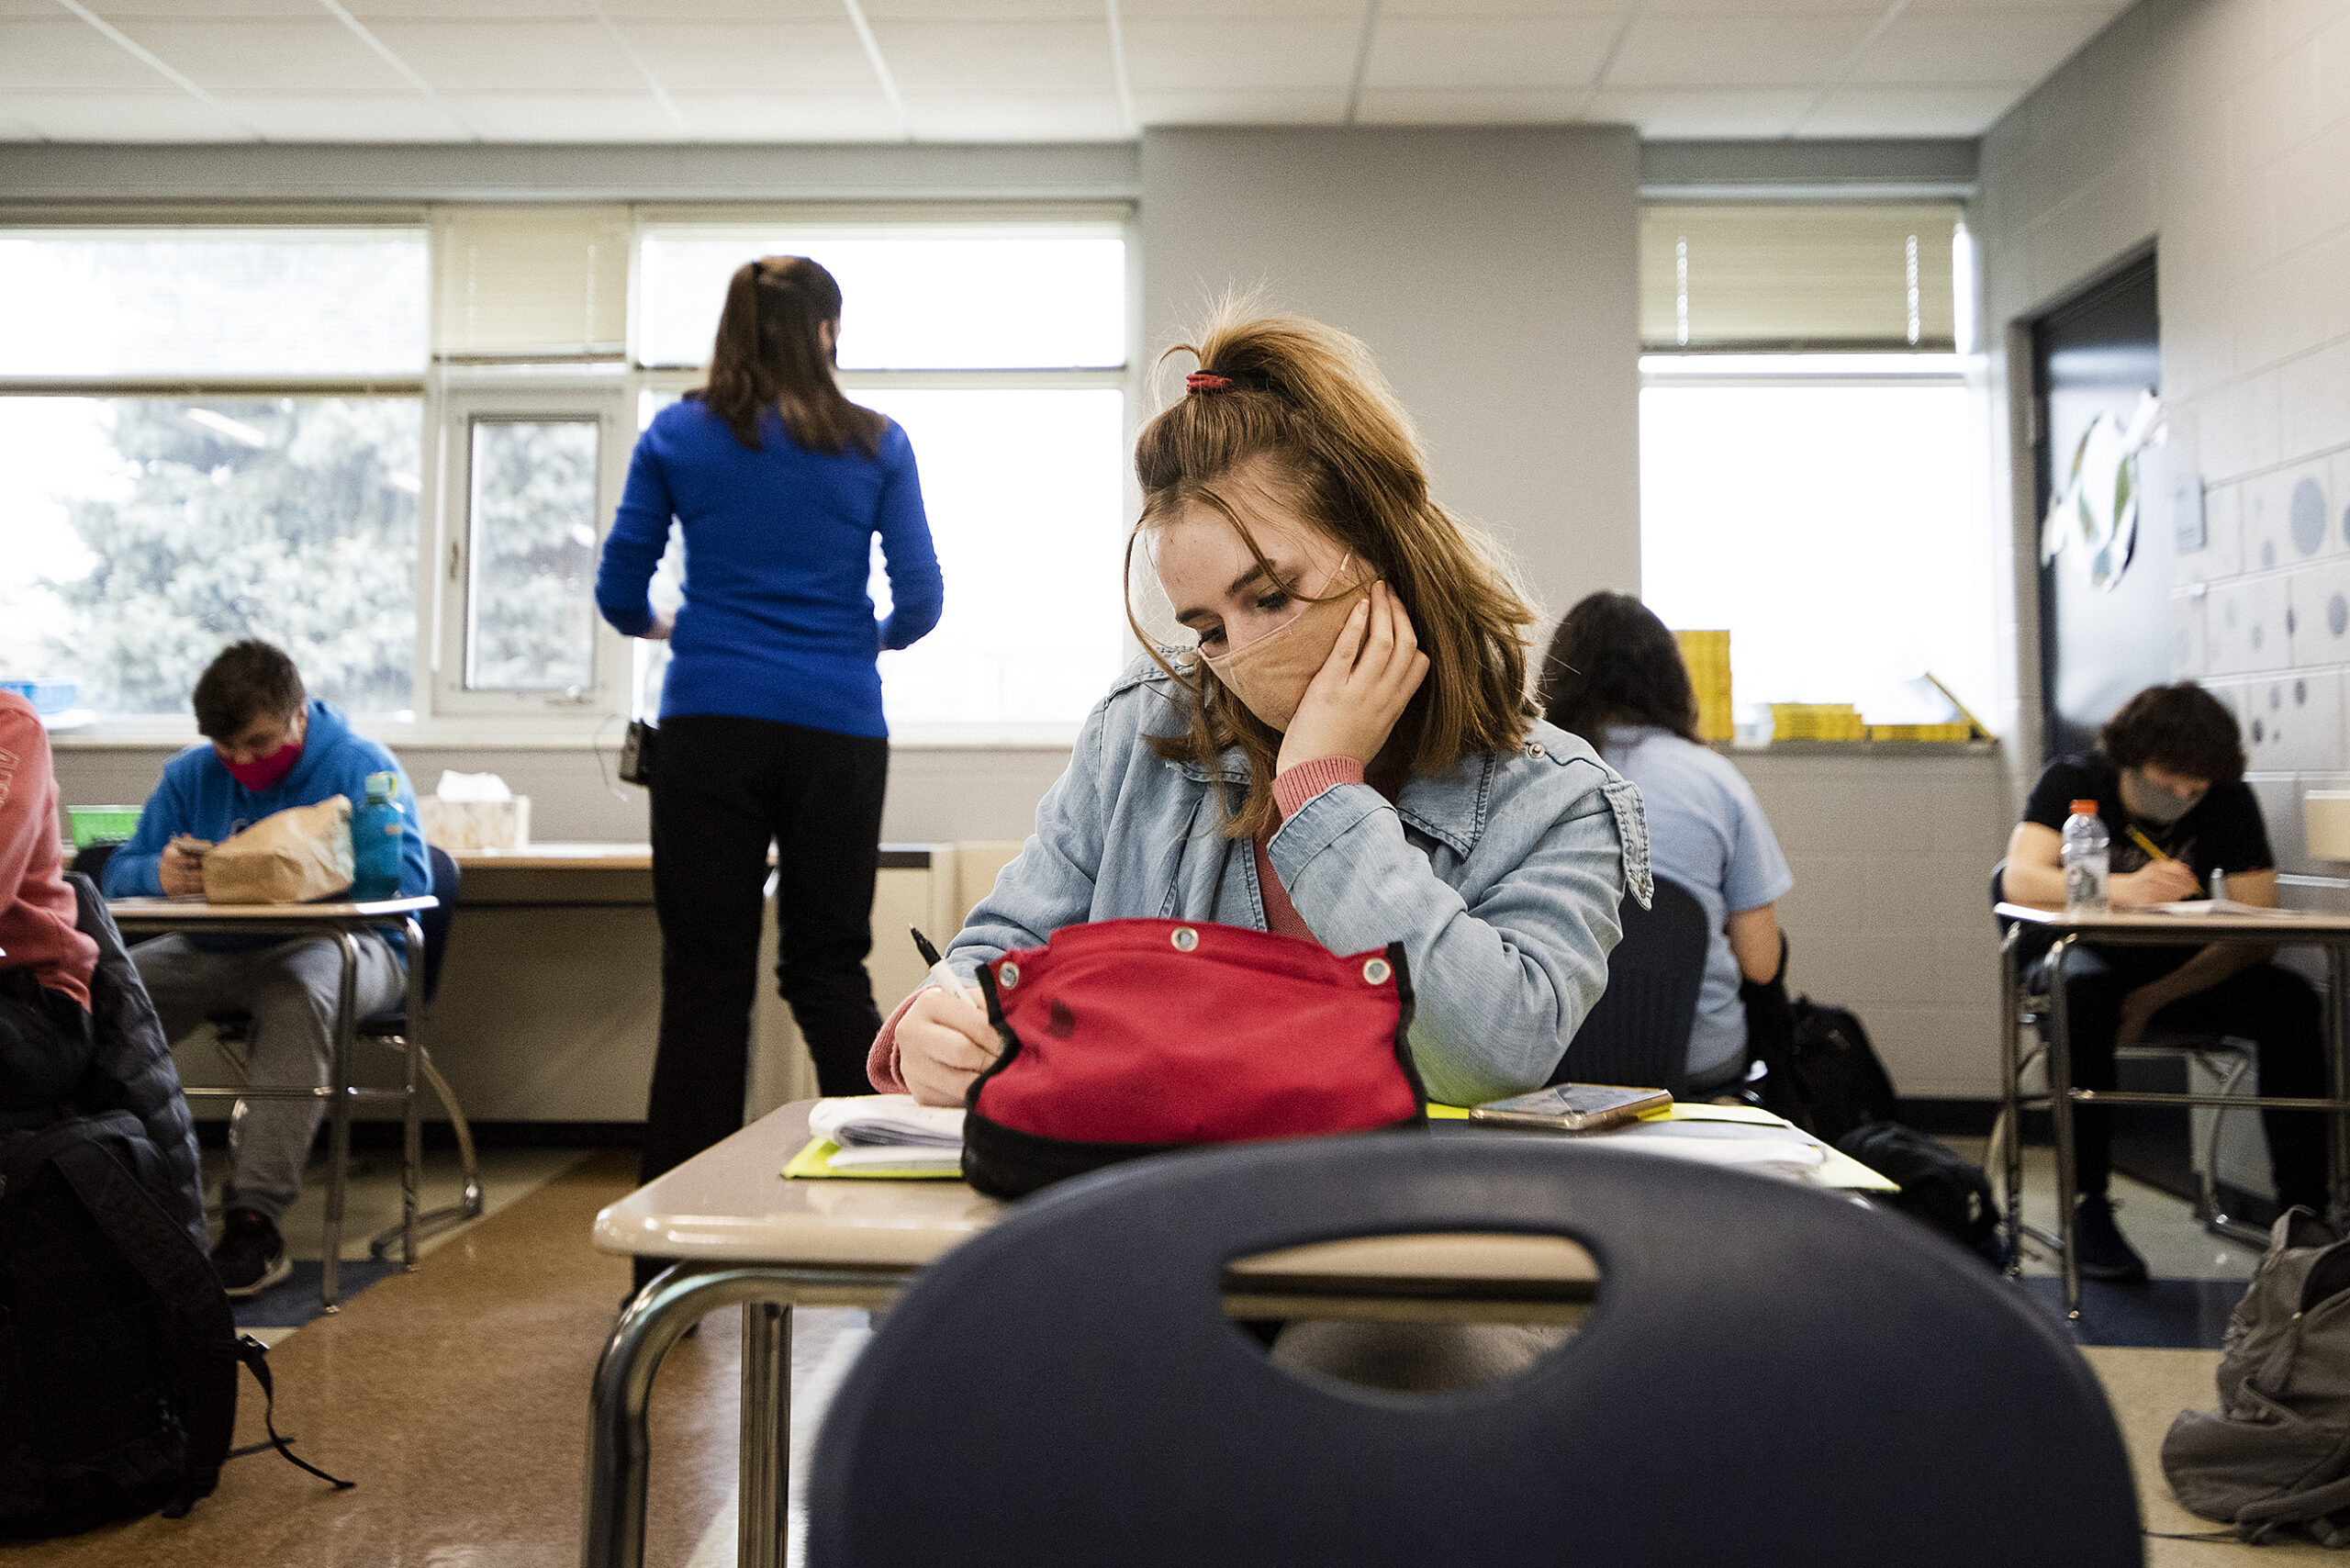 A student rests her head in her hand as she works on classwork at a desk.